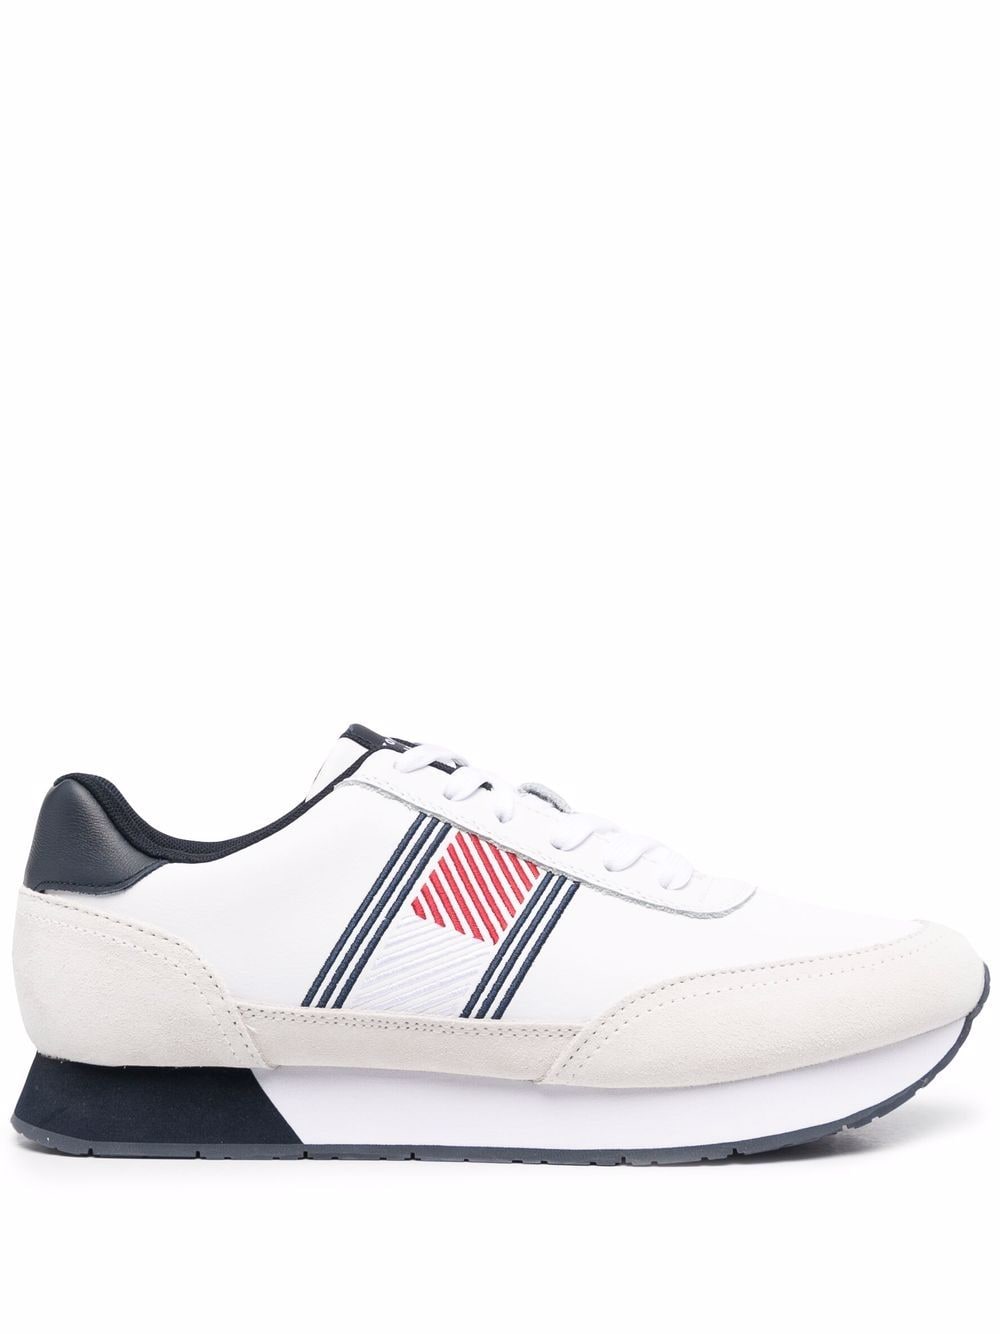 Tommy Hilfiger embroidered-design Sneakers - Farfetch